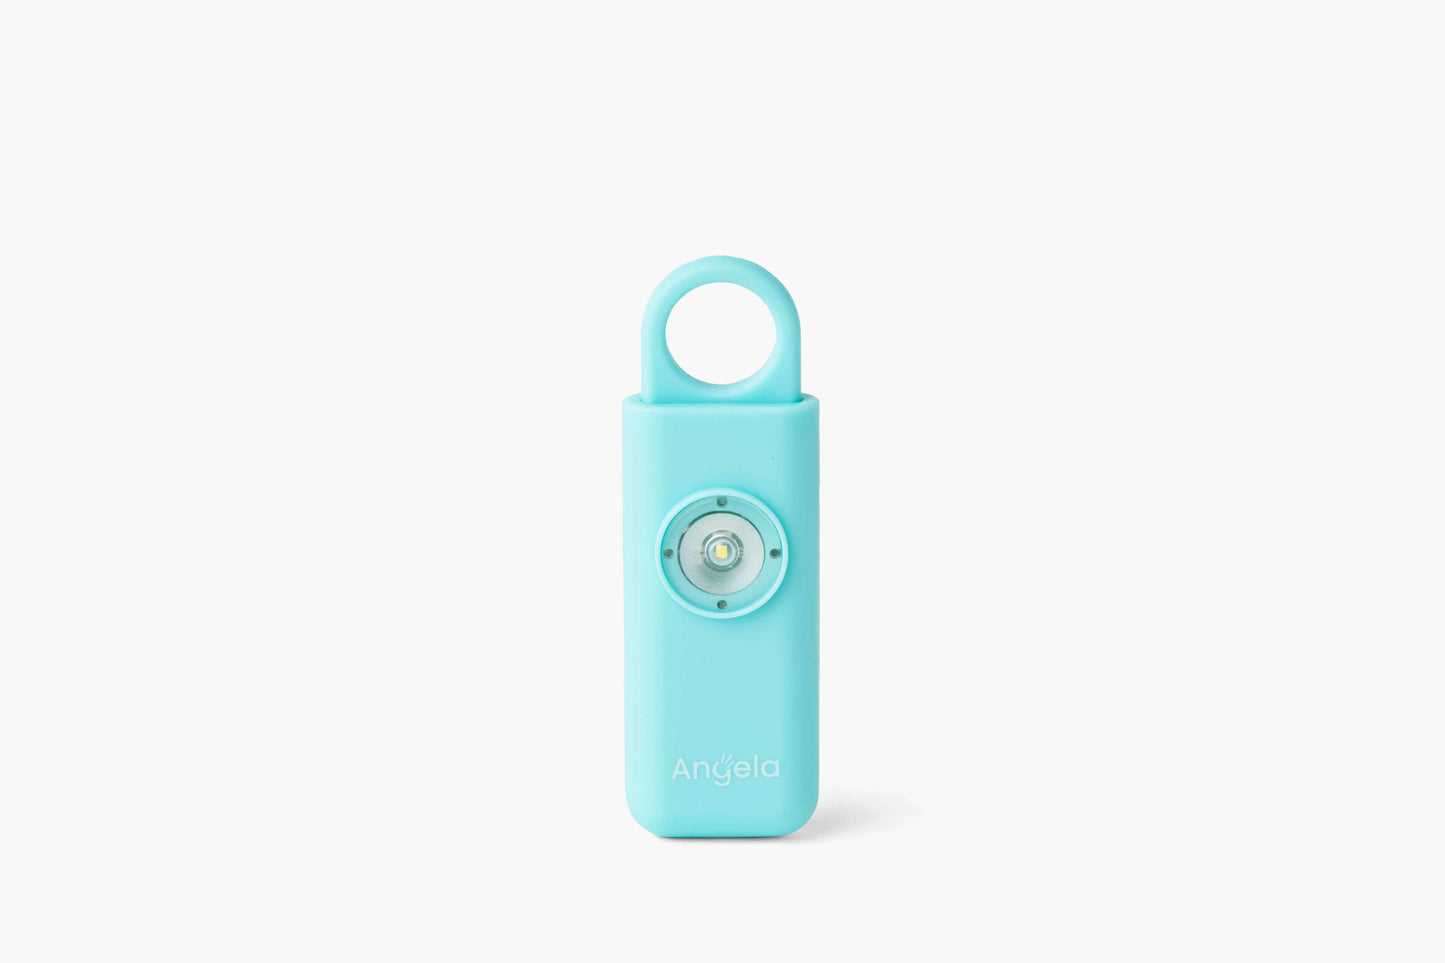 Angela's Personal Safety Alarm (Frosted Blue)